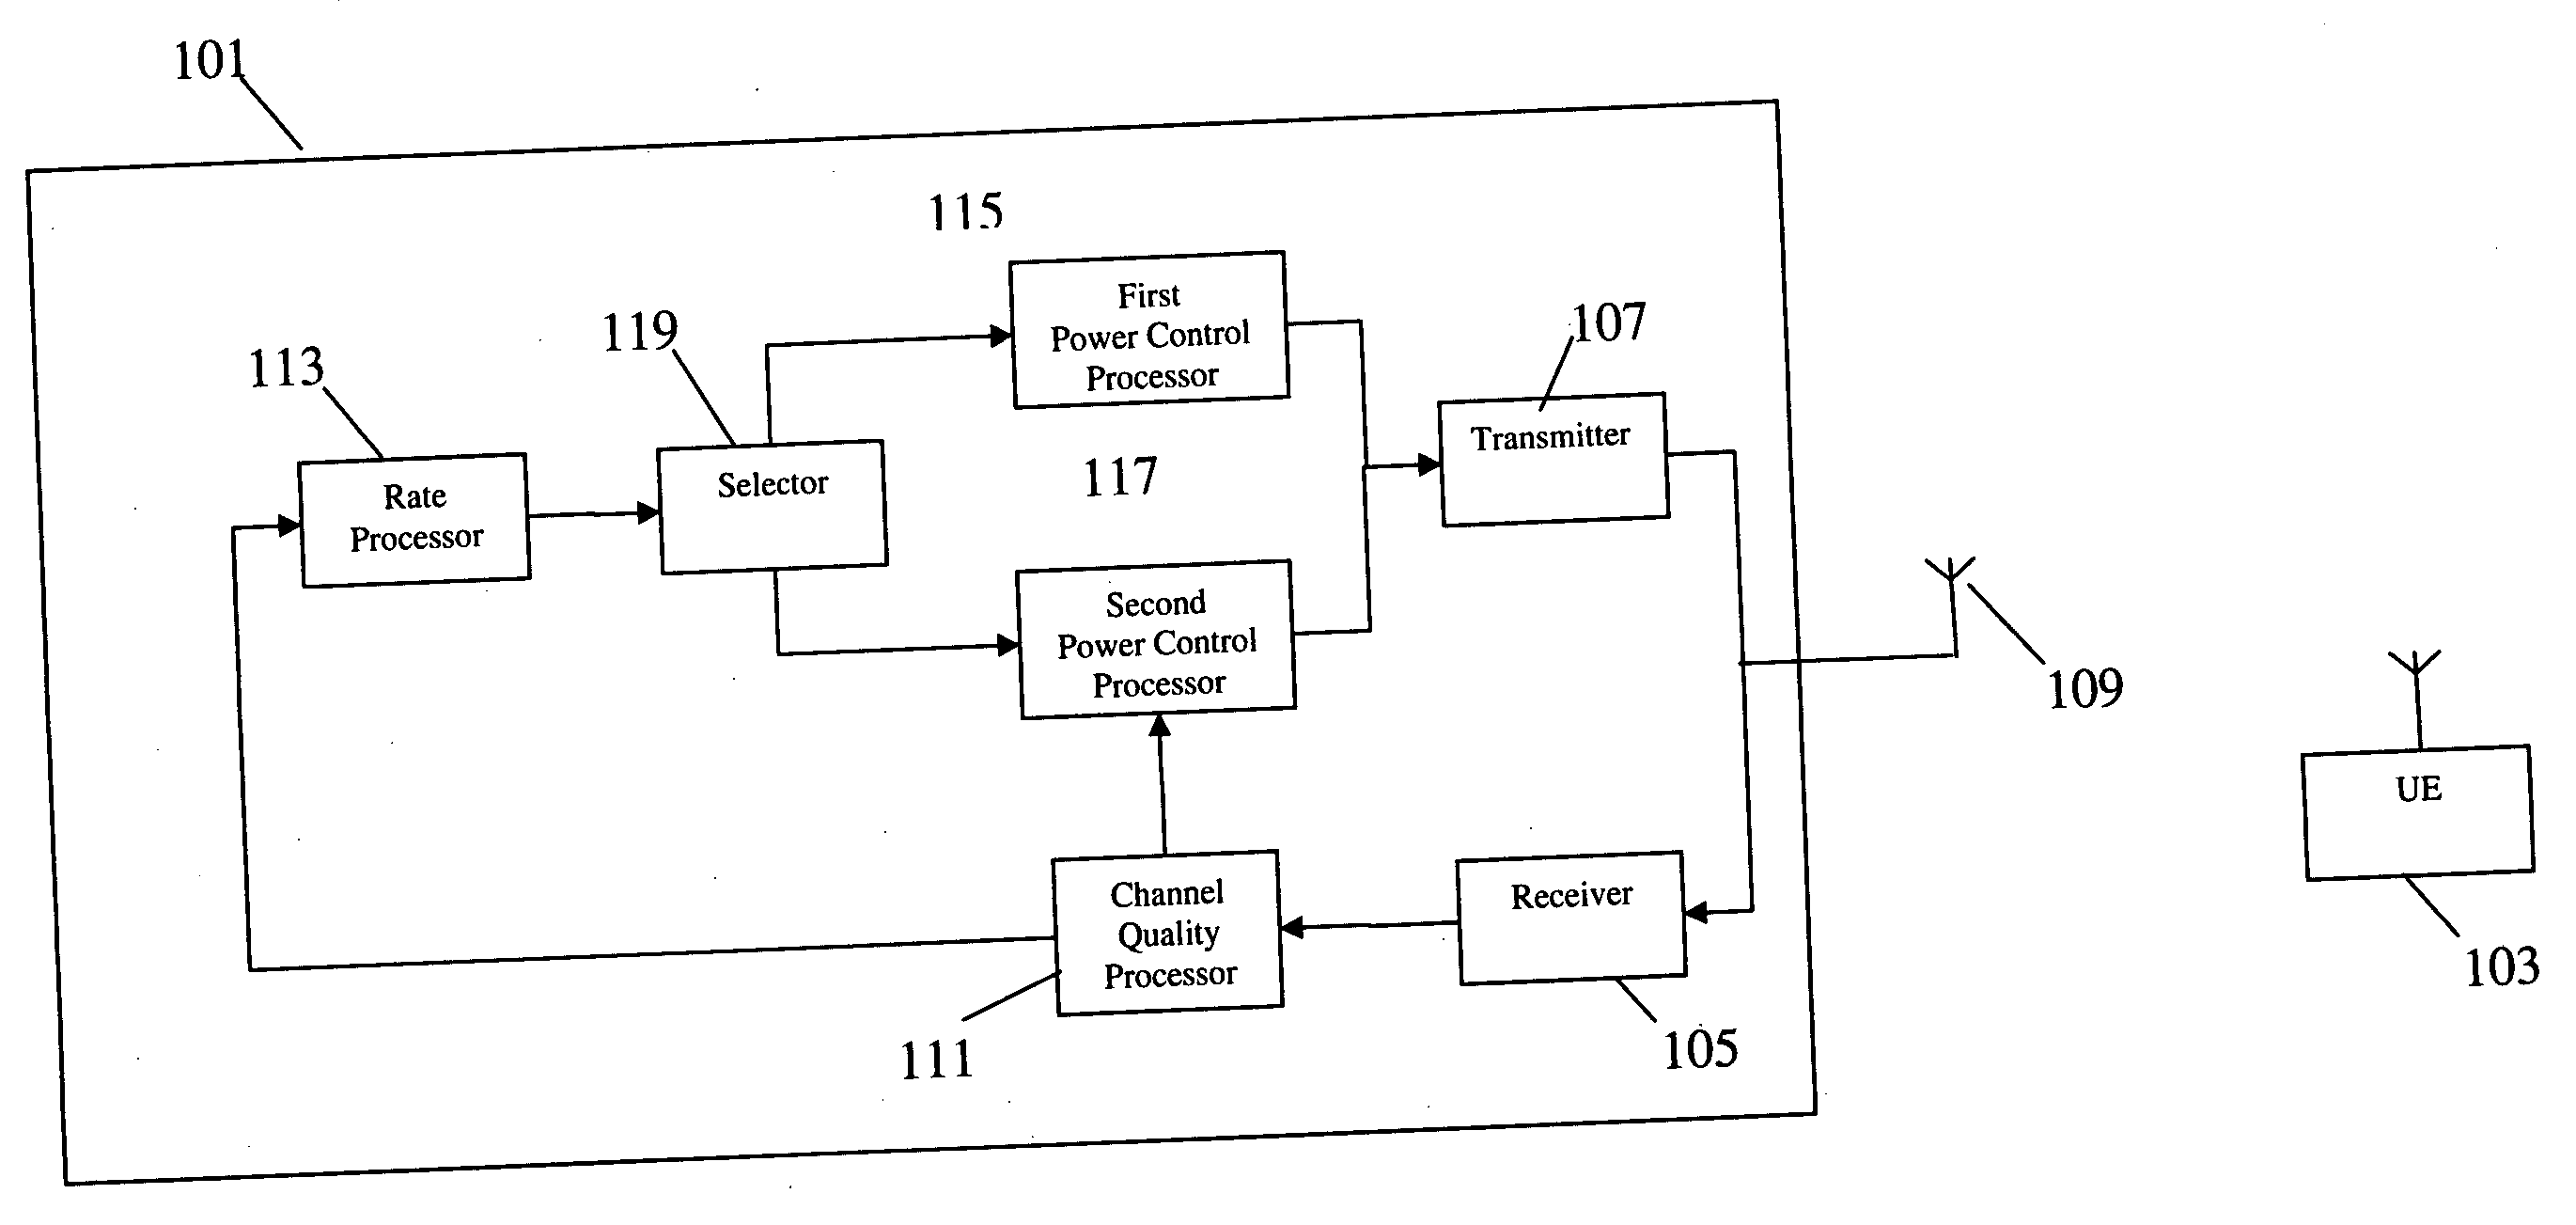 Apparatus and method for radio transmission in a cellular communication system